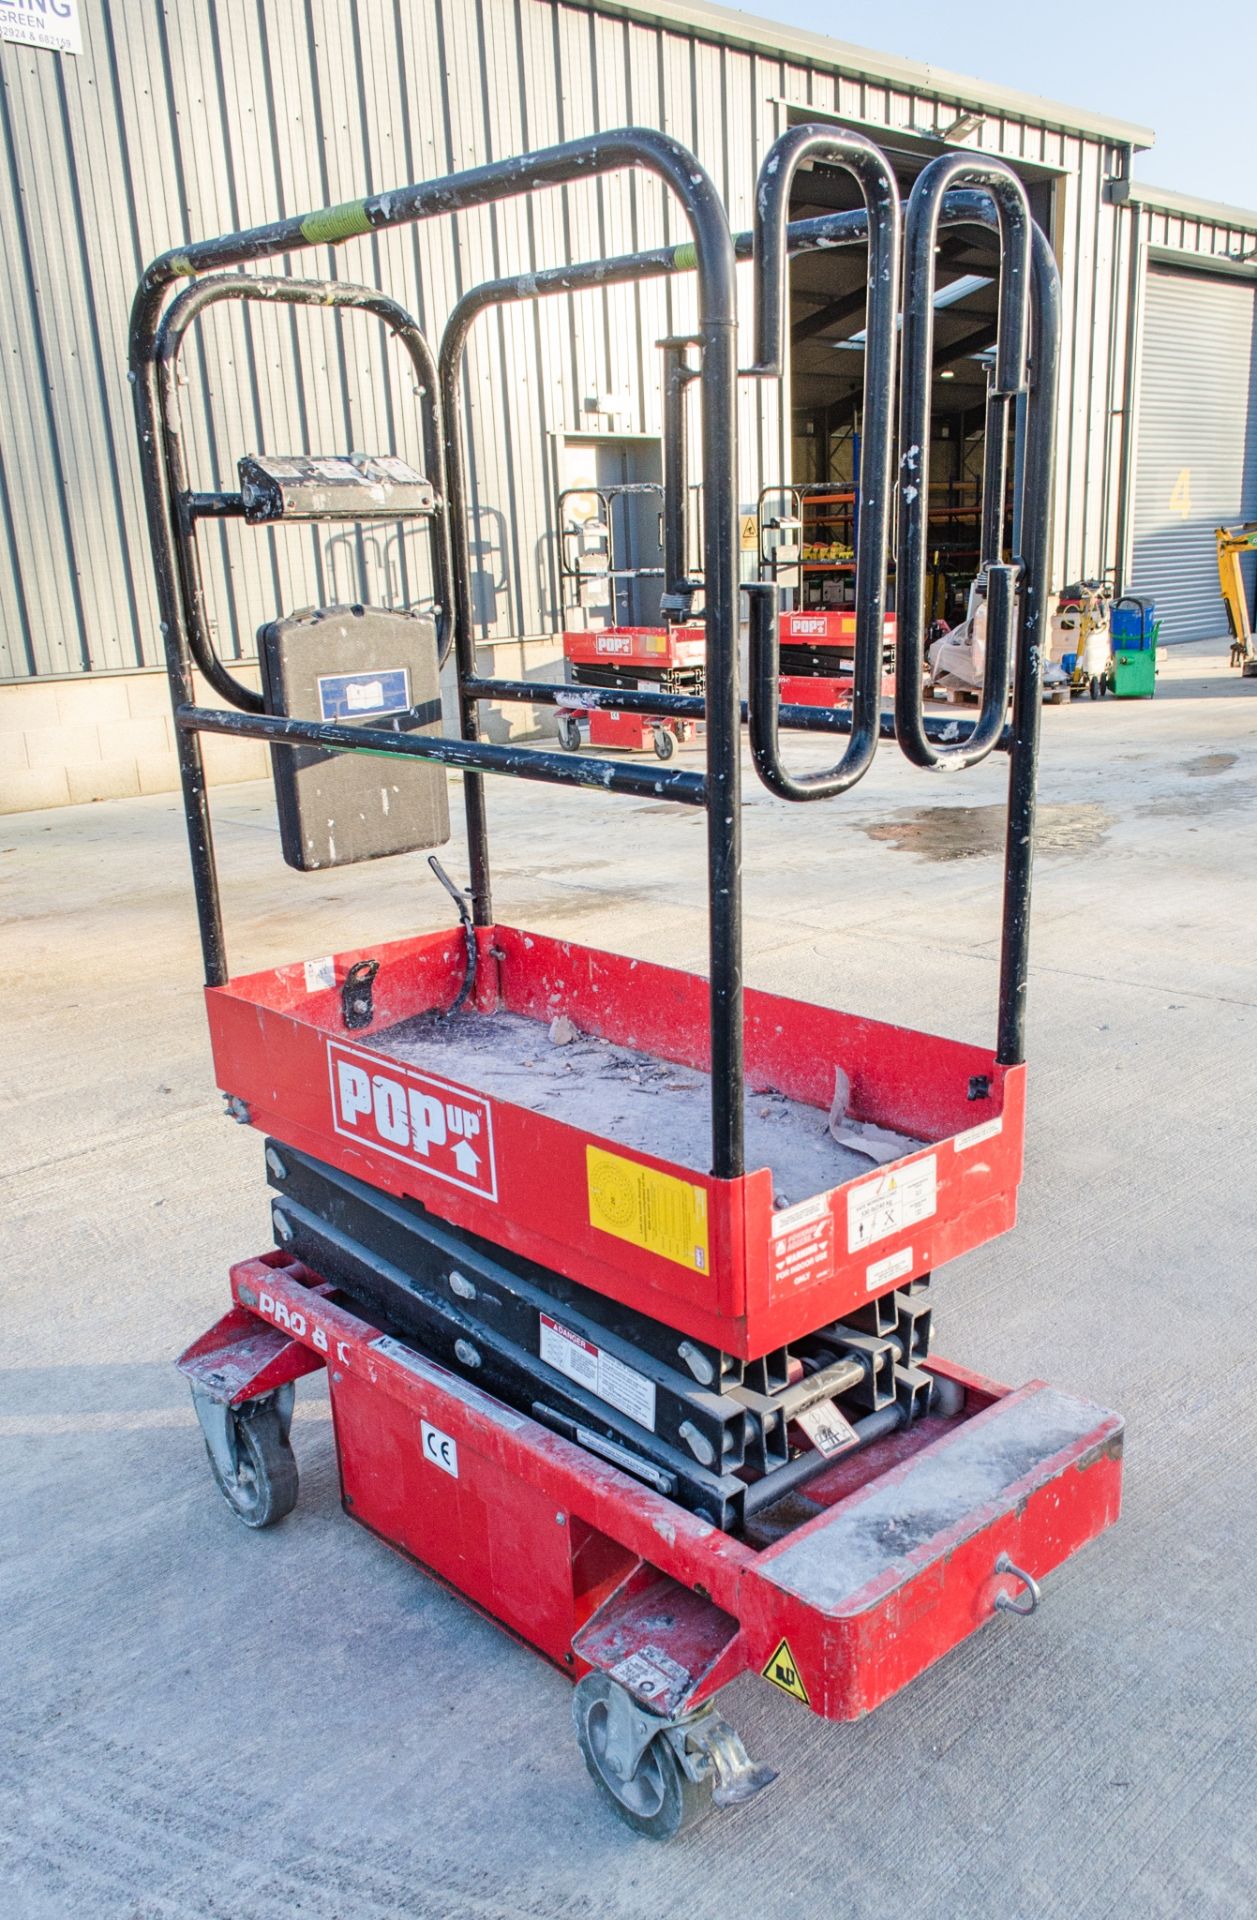 Pop Up Pro 8 battery electric push around scissor lift A740275 - Image 2 of 4